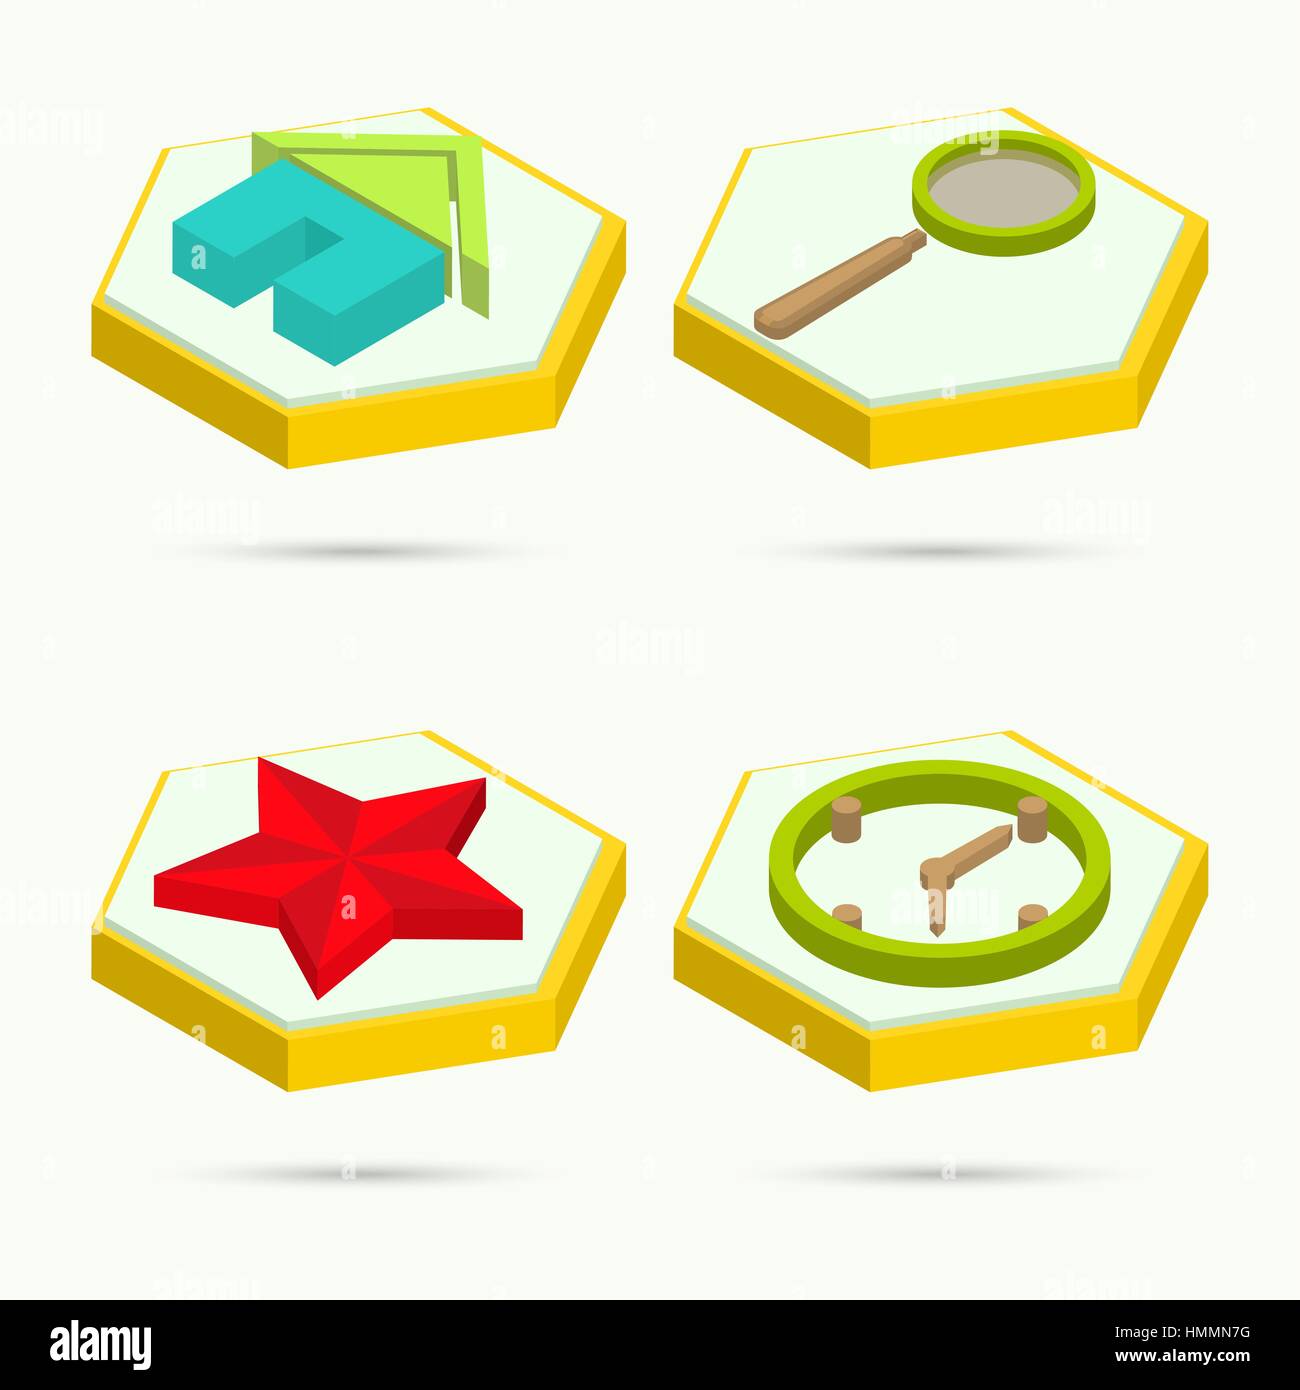 Isometric icons. Collection of four icons. Home. Search. Star. Clock. Vector illustration Stock Vector